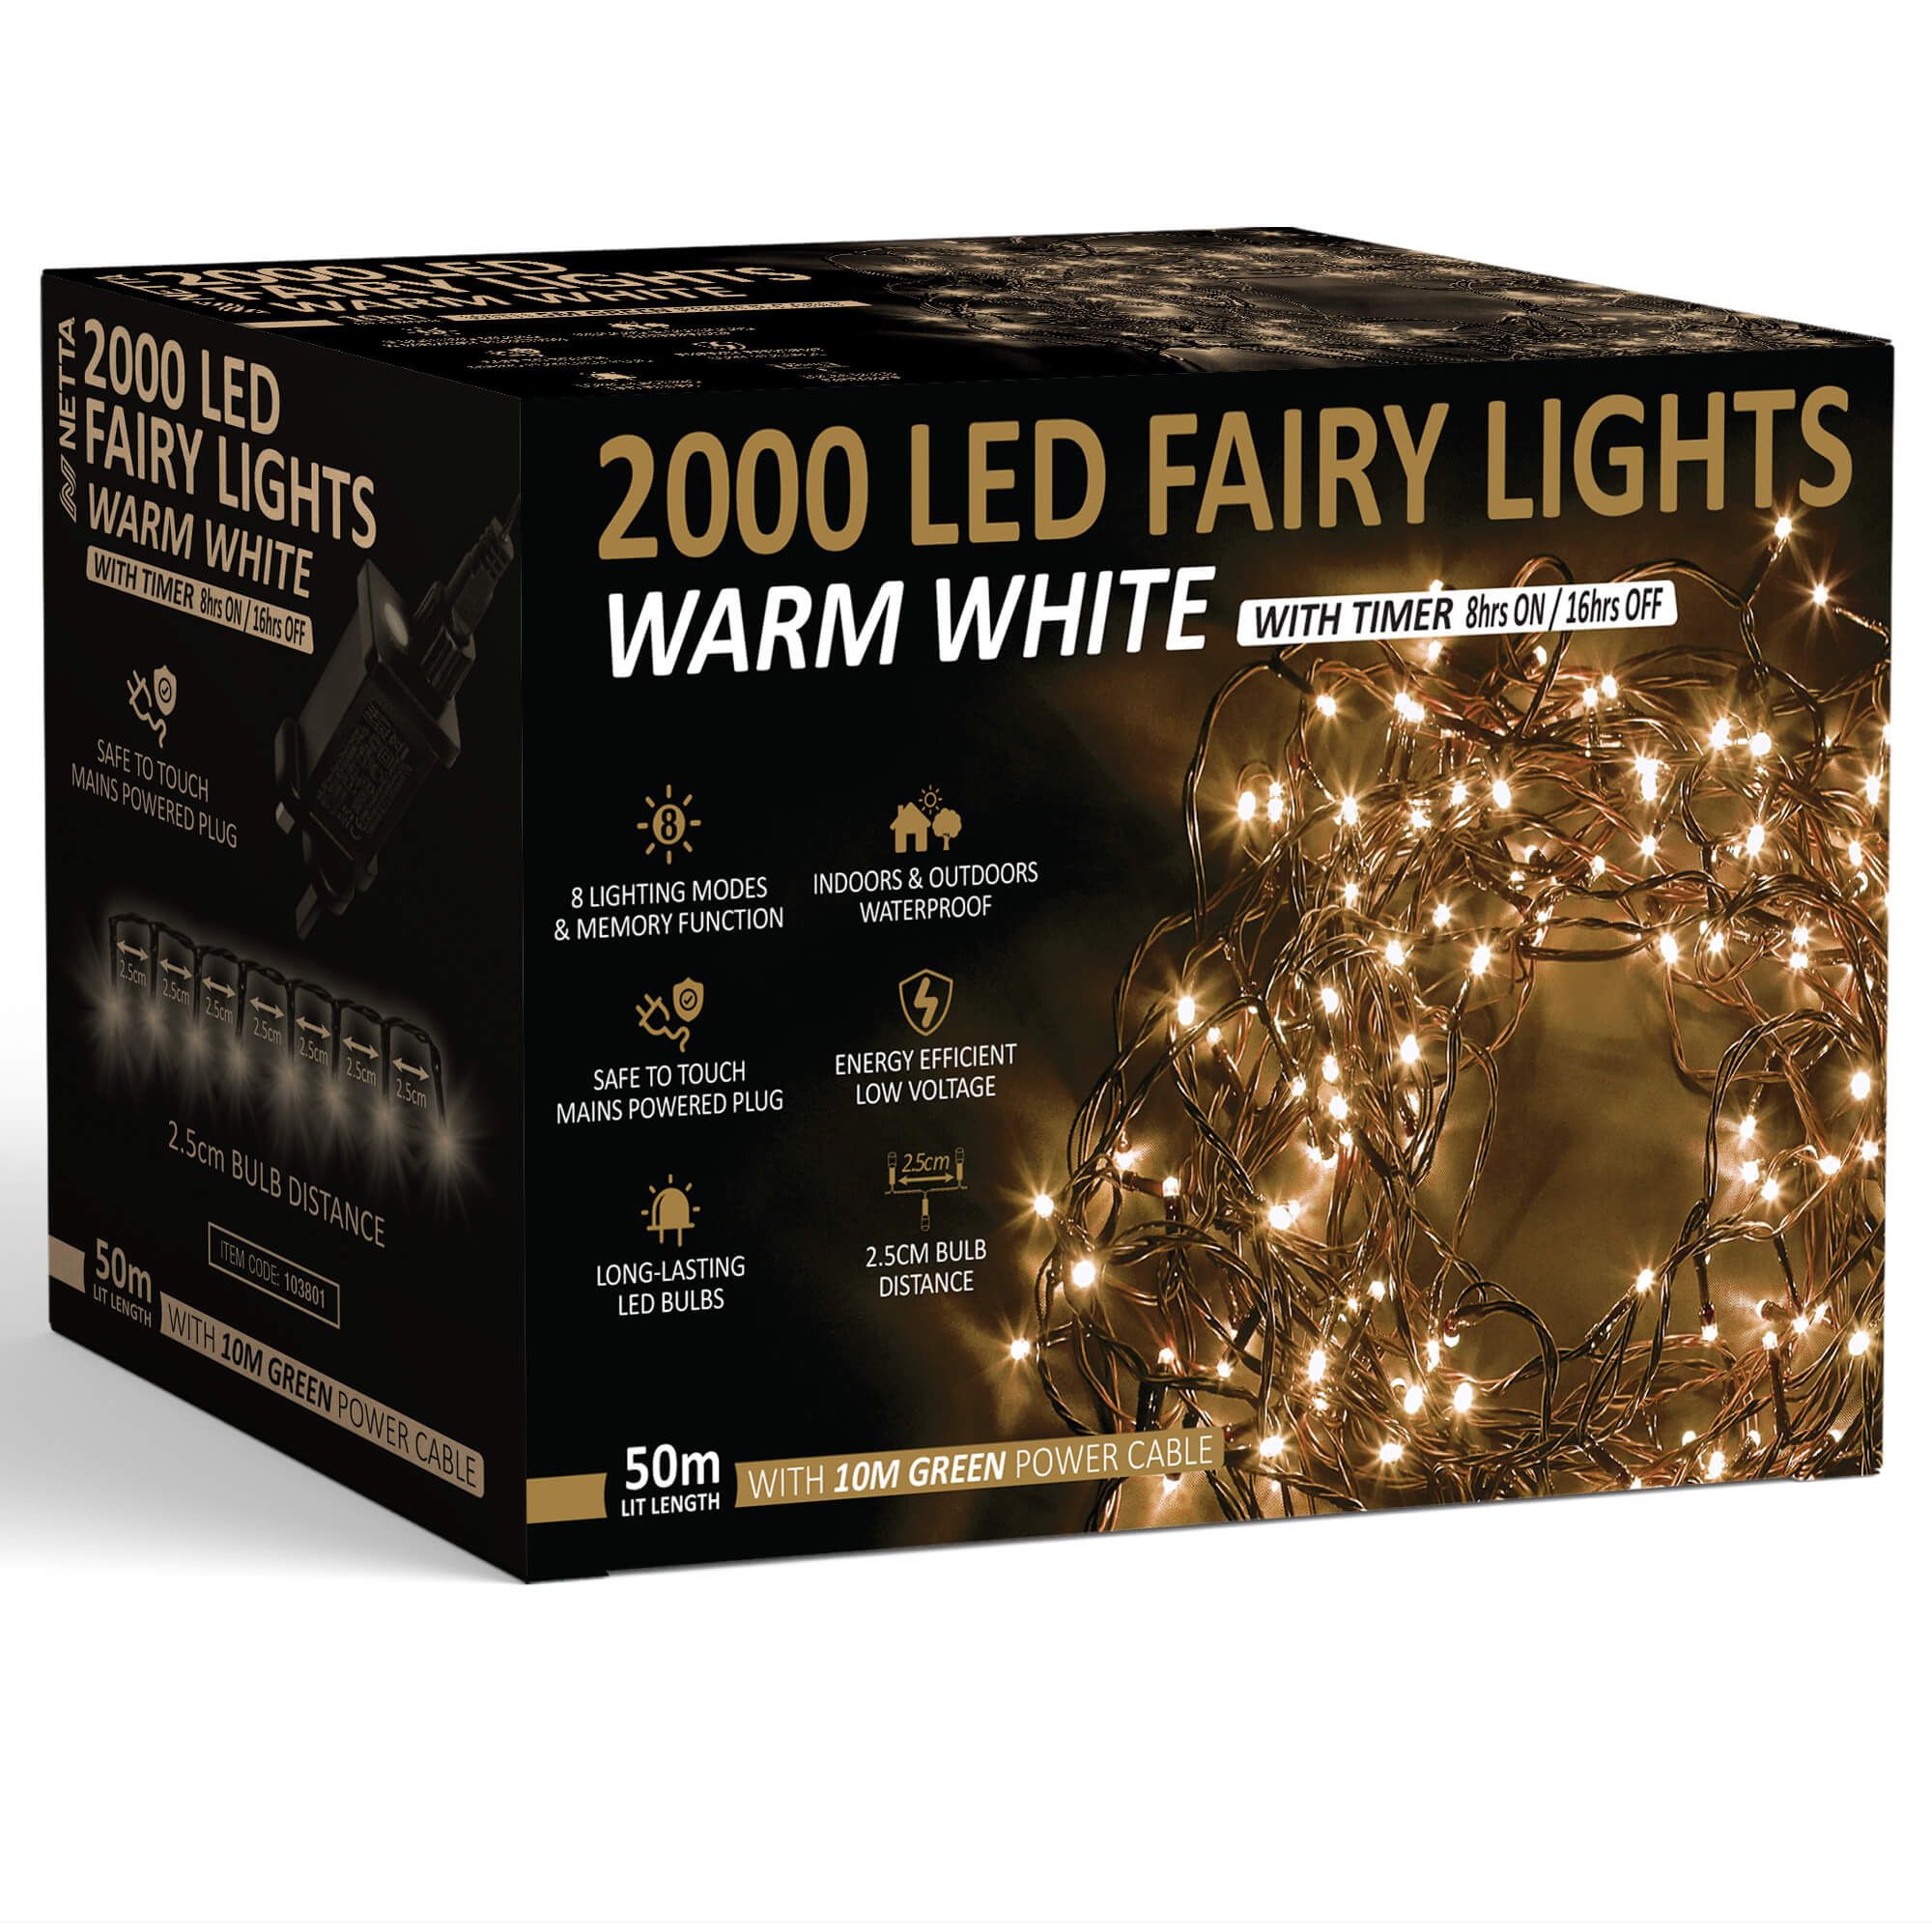 NETTA 2000 LED Fairy String Lights 50M Indoor & Outdoor Christmas Tree Lights Green Cable - Warm White